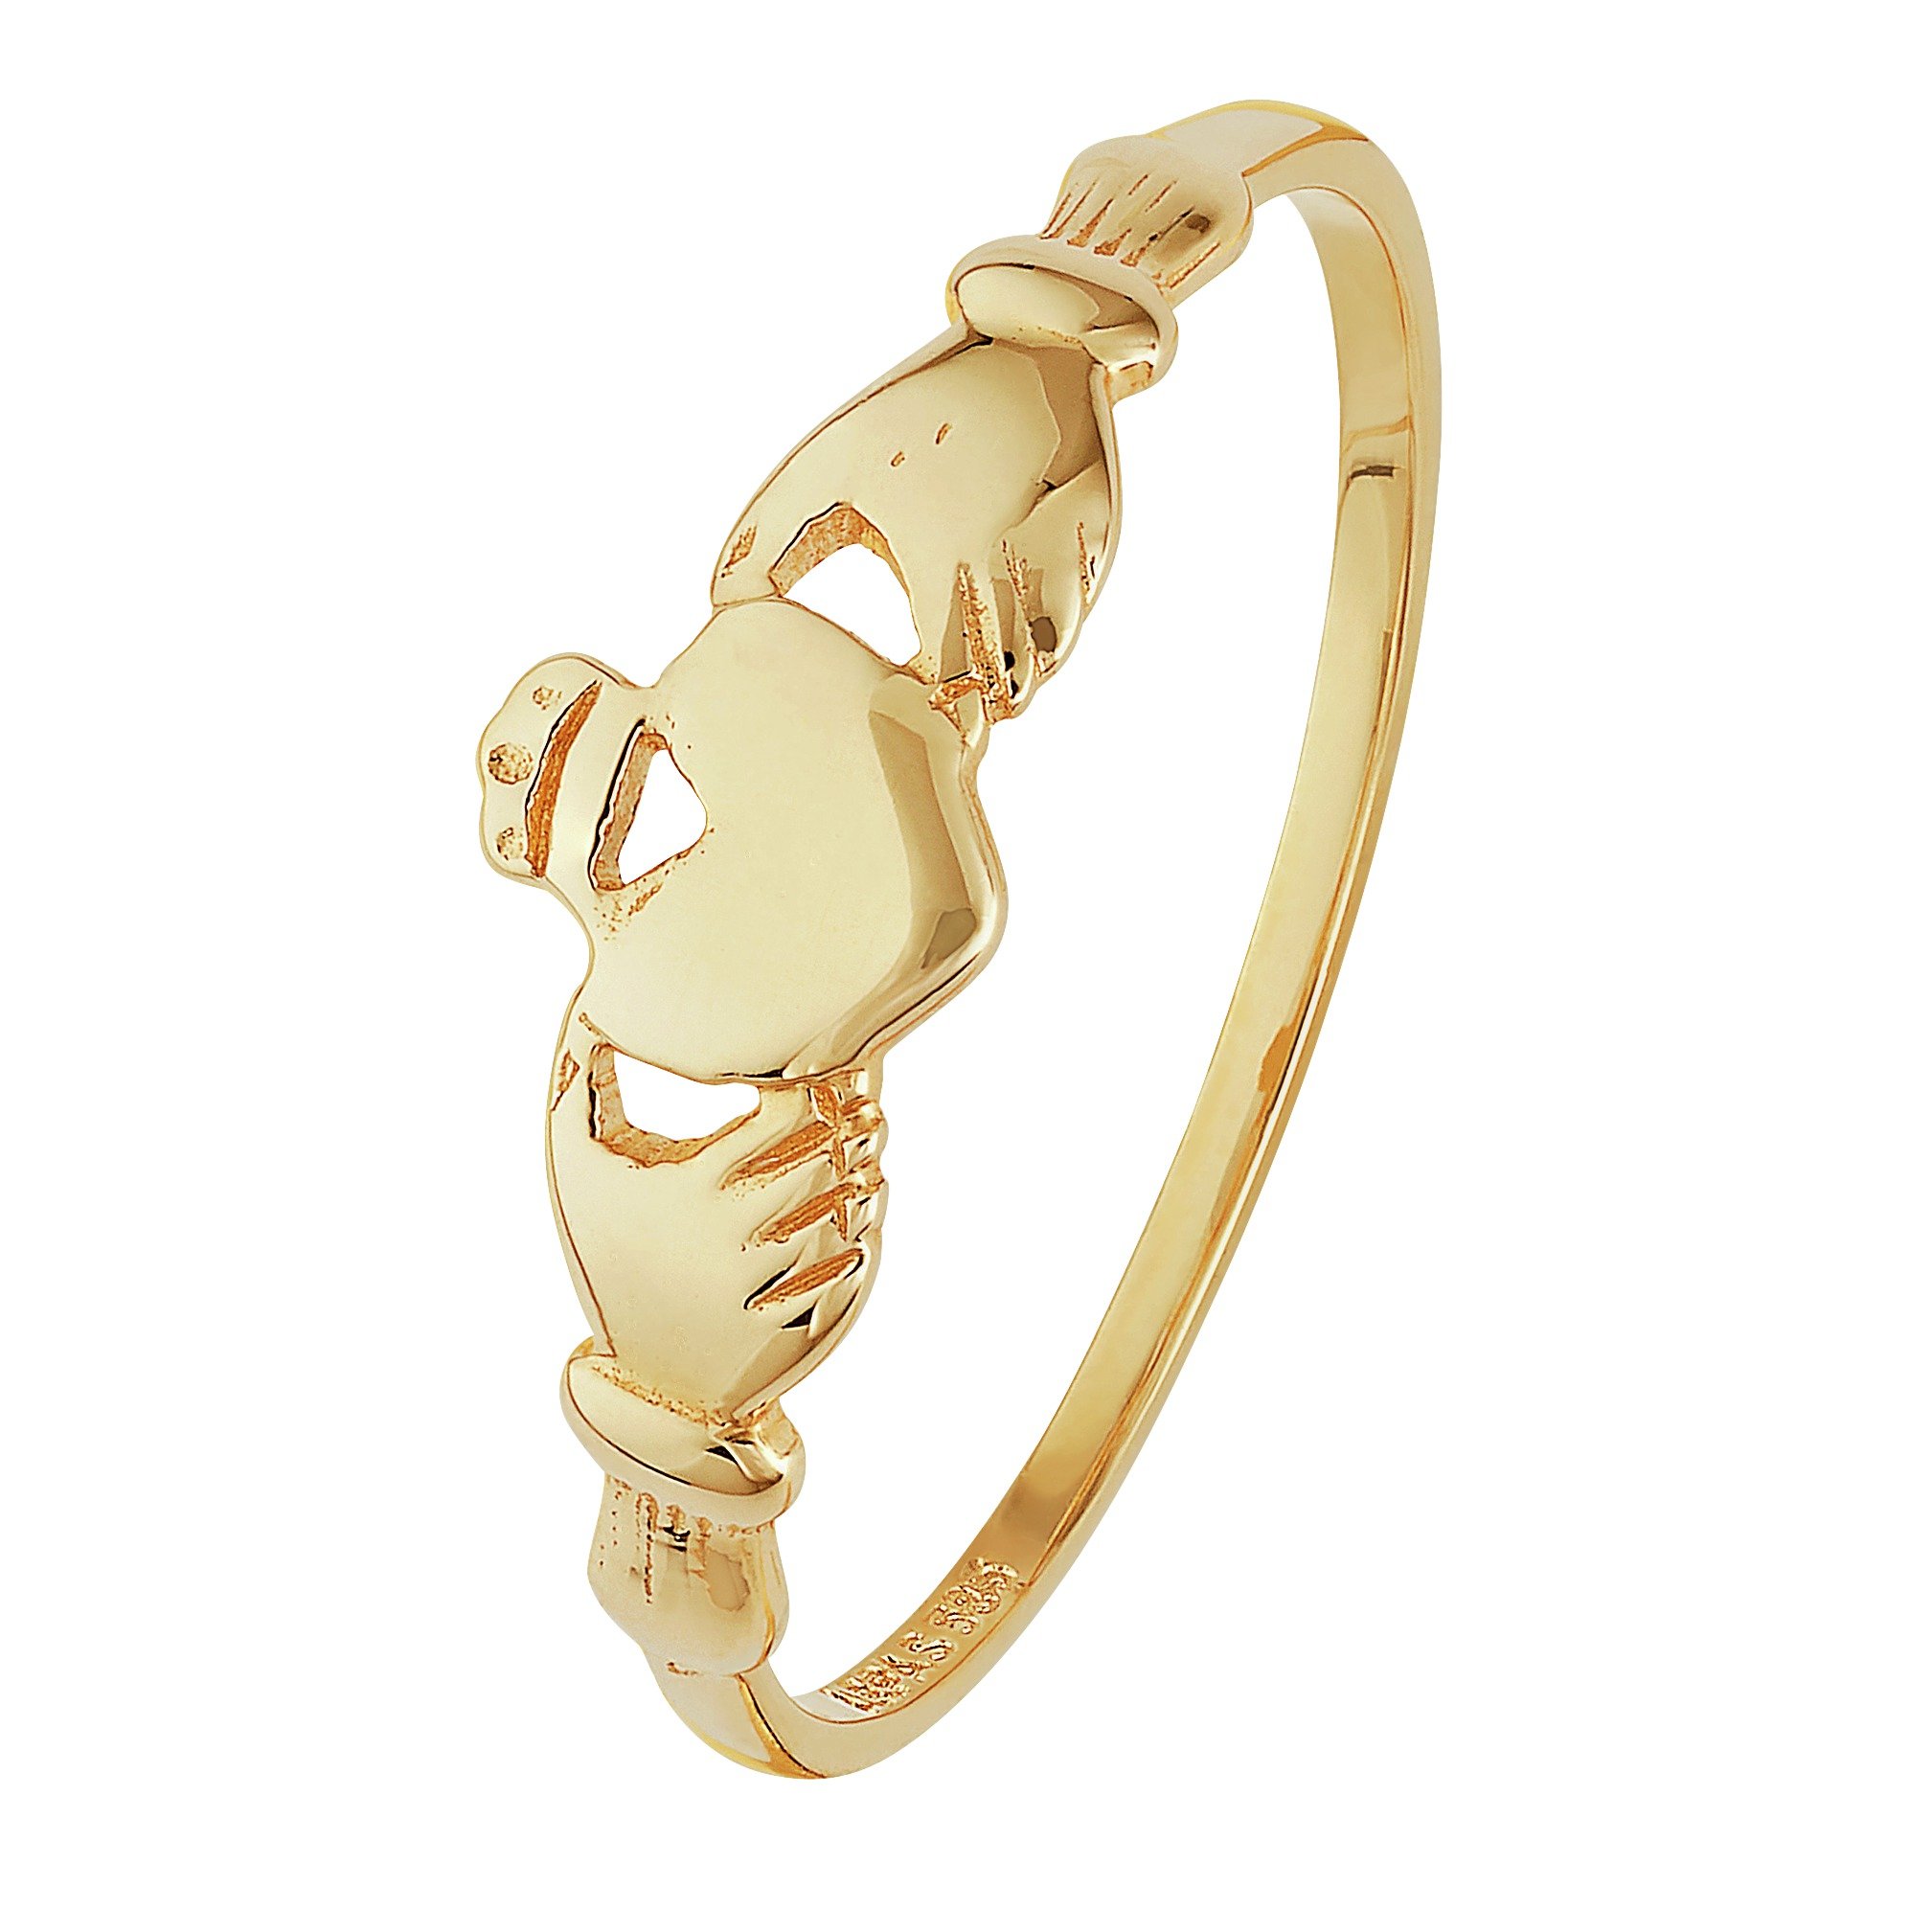 Revere 9ct Yellow Gold Claddagh Ring